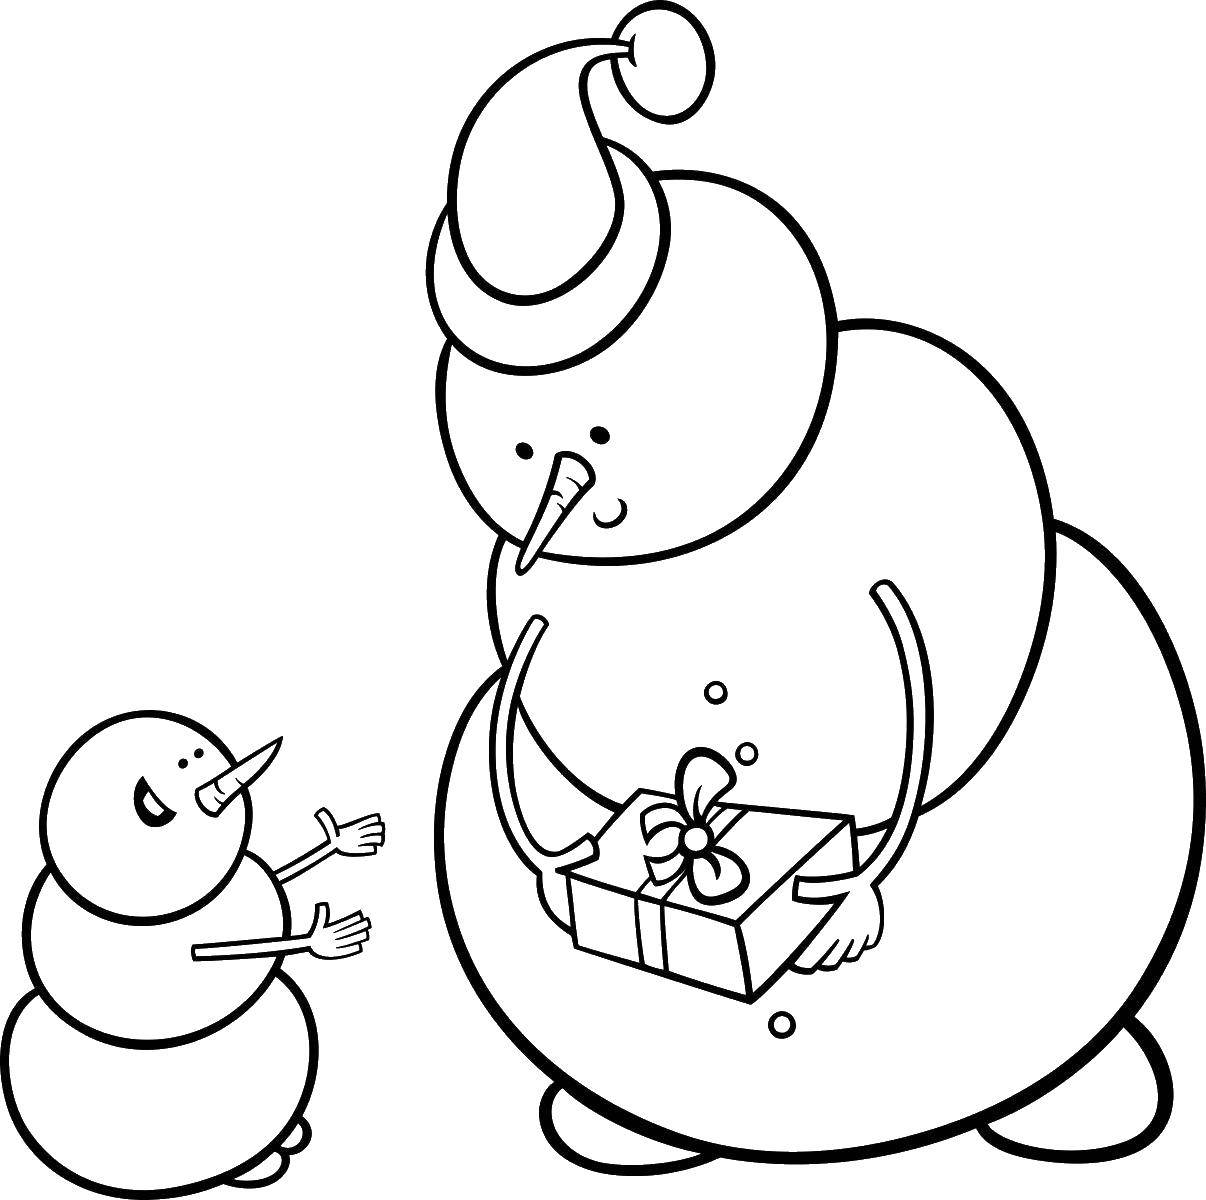 Coloring Gifts from the snowman. Category snowman. Tags:  Snowman, snow, winter, joy.